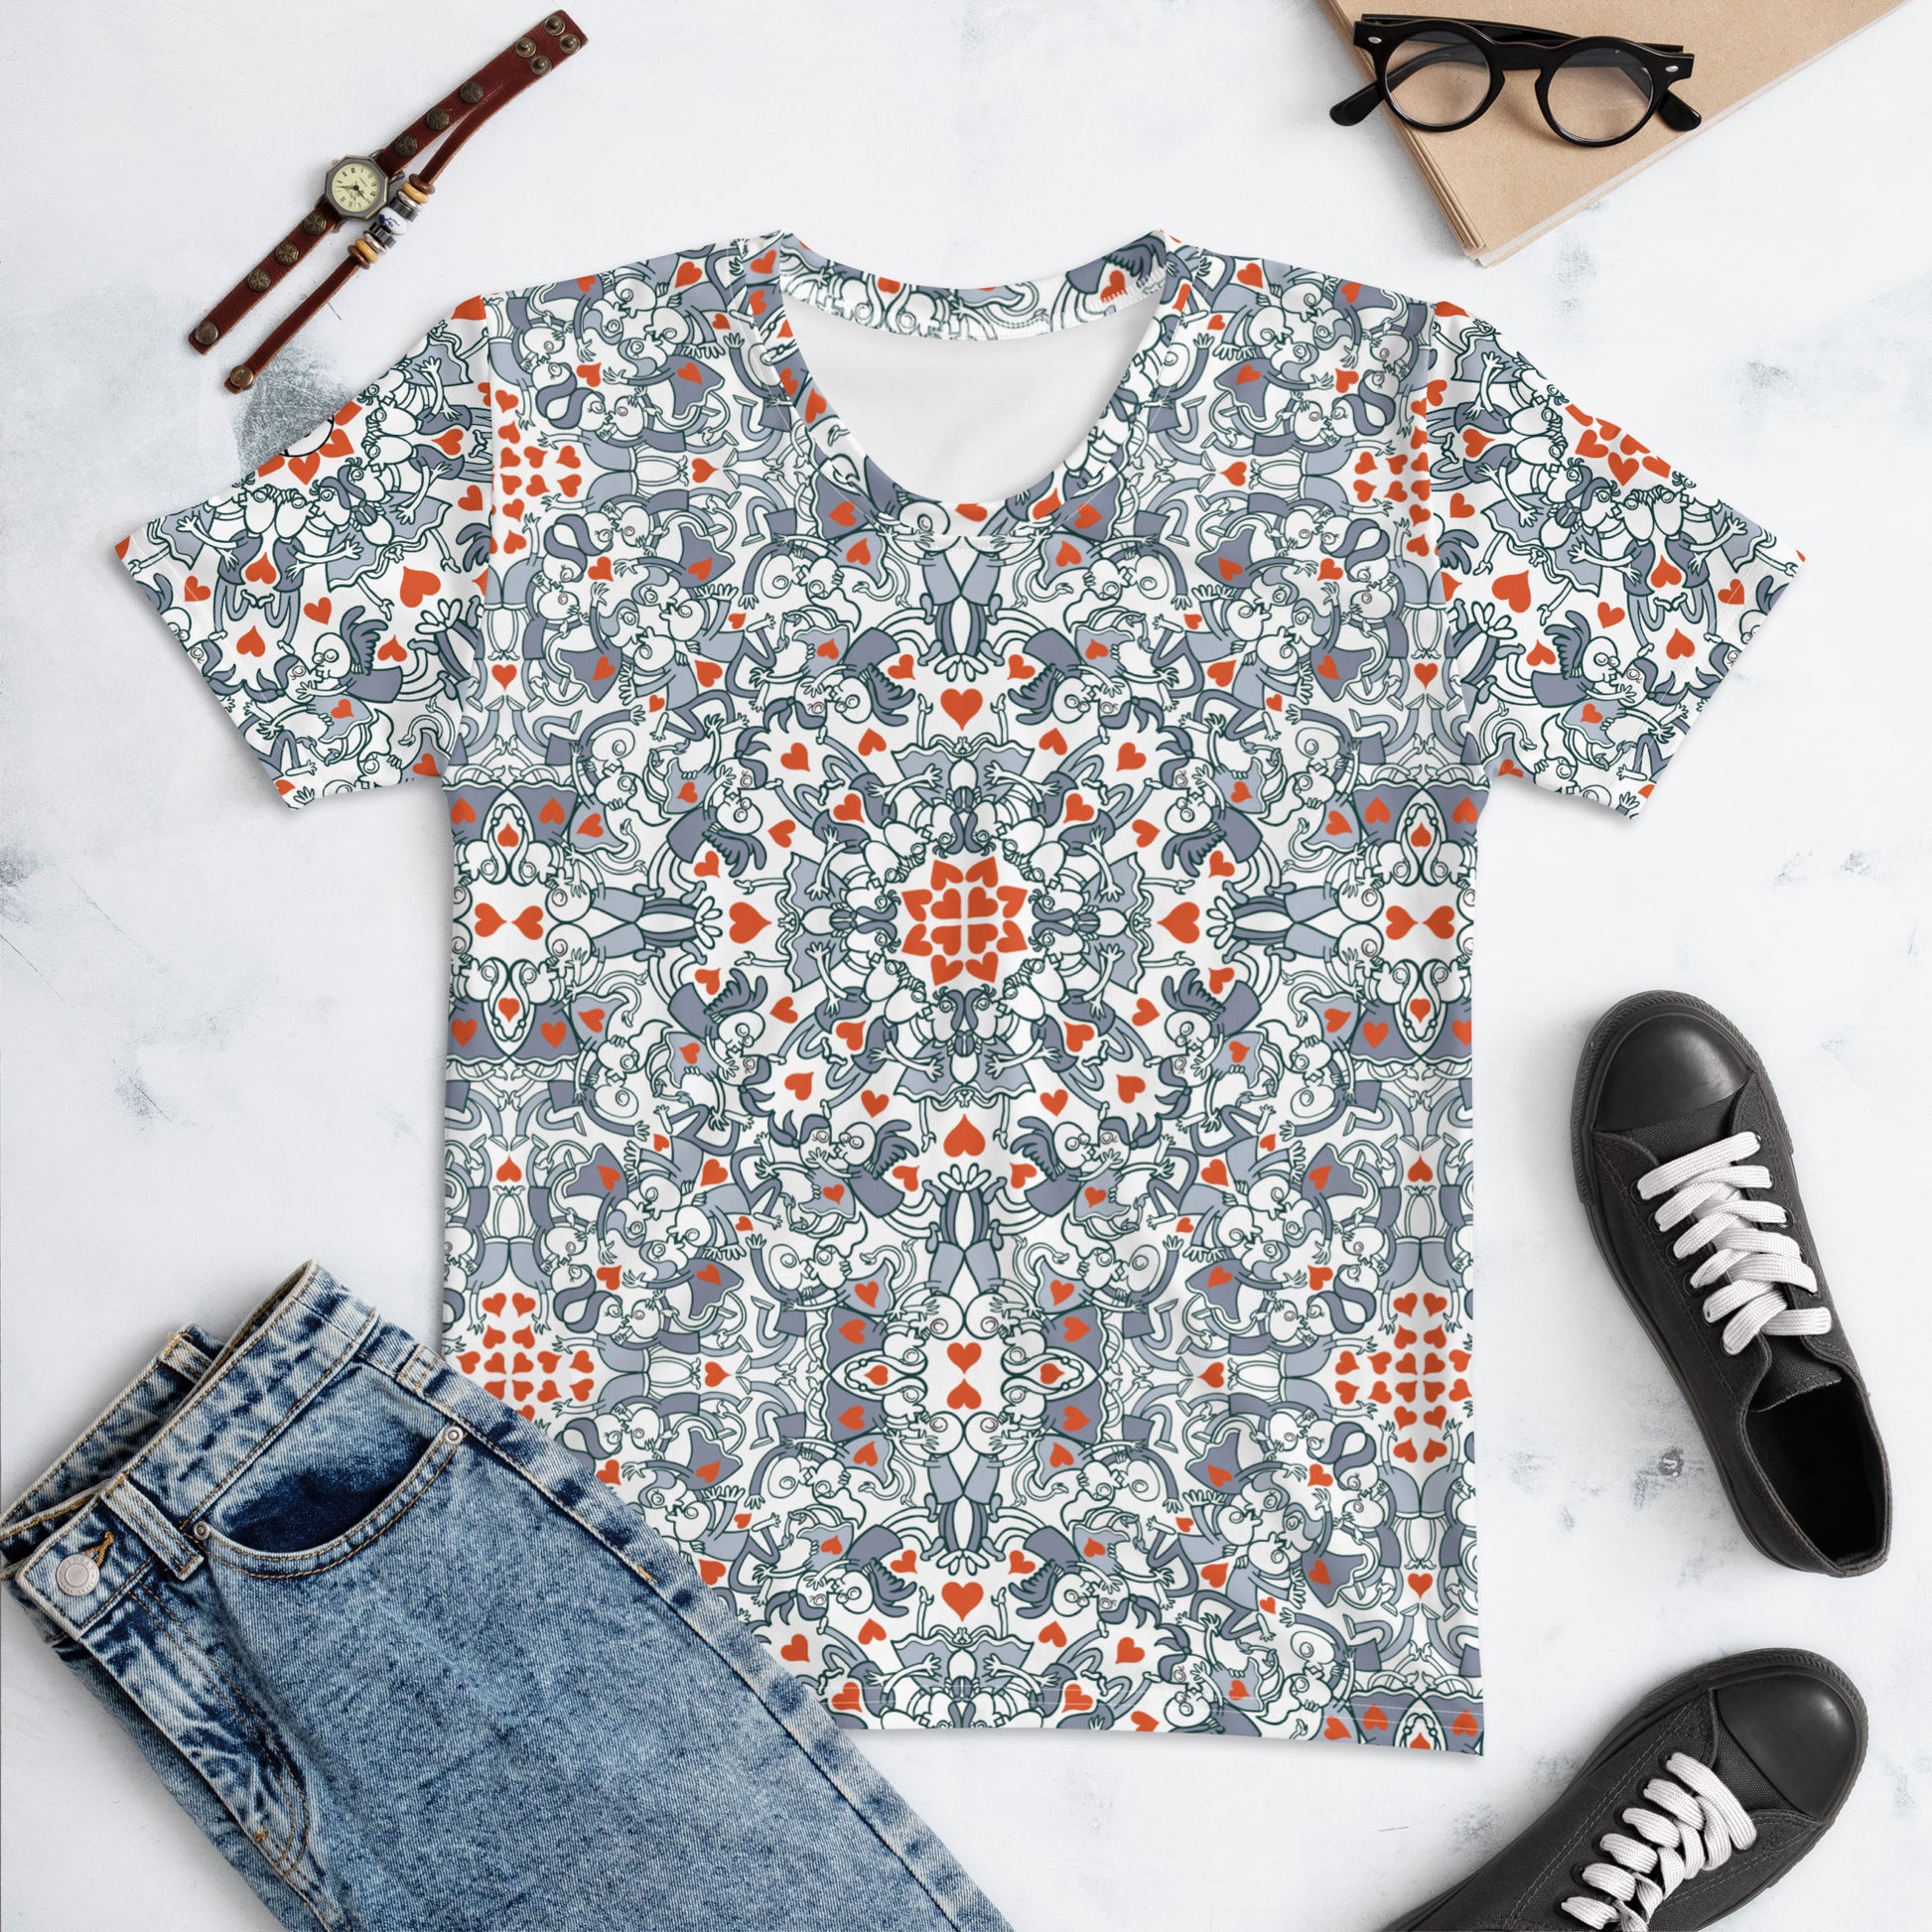 Kissed by Doodles in Valentine's Mandala Melody - Women's T-shirt. Lifestyle